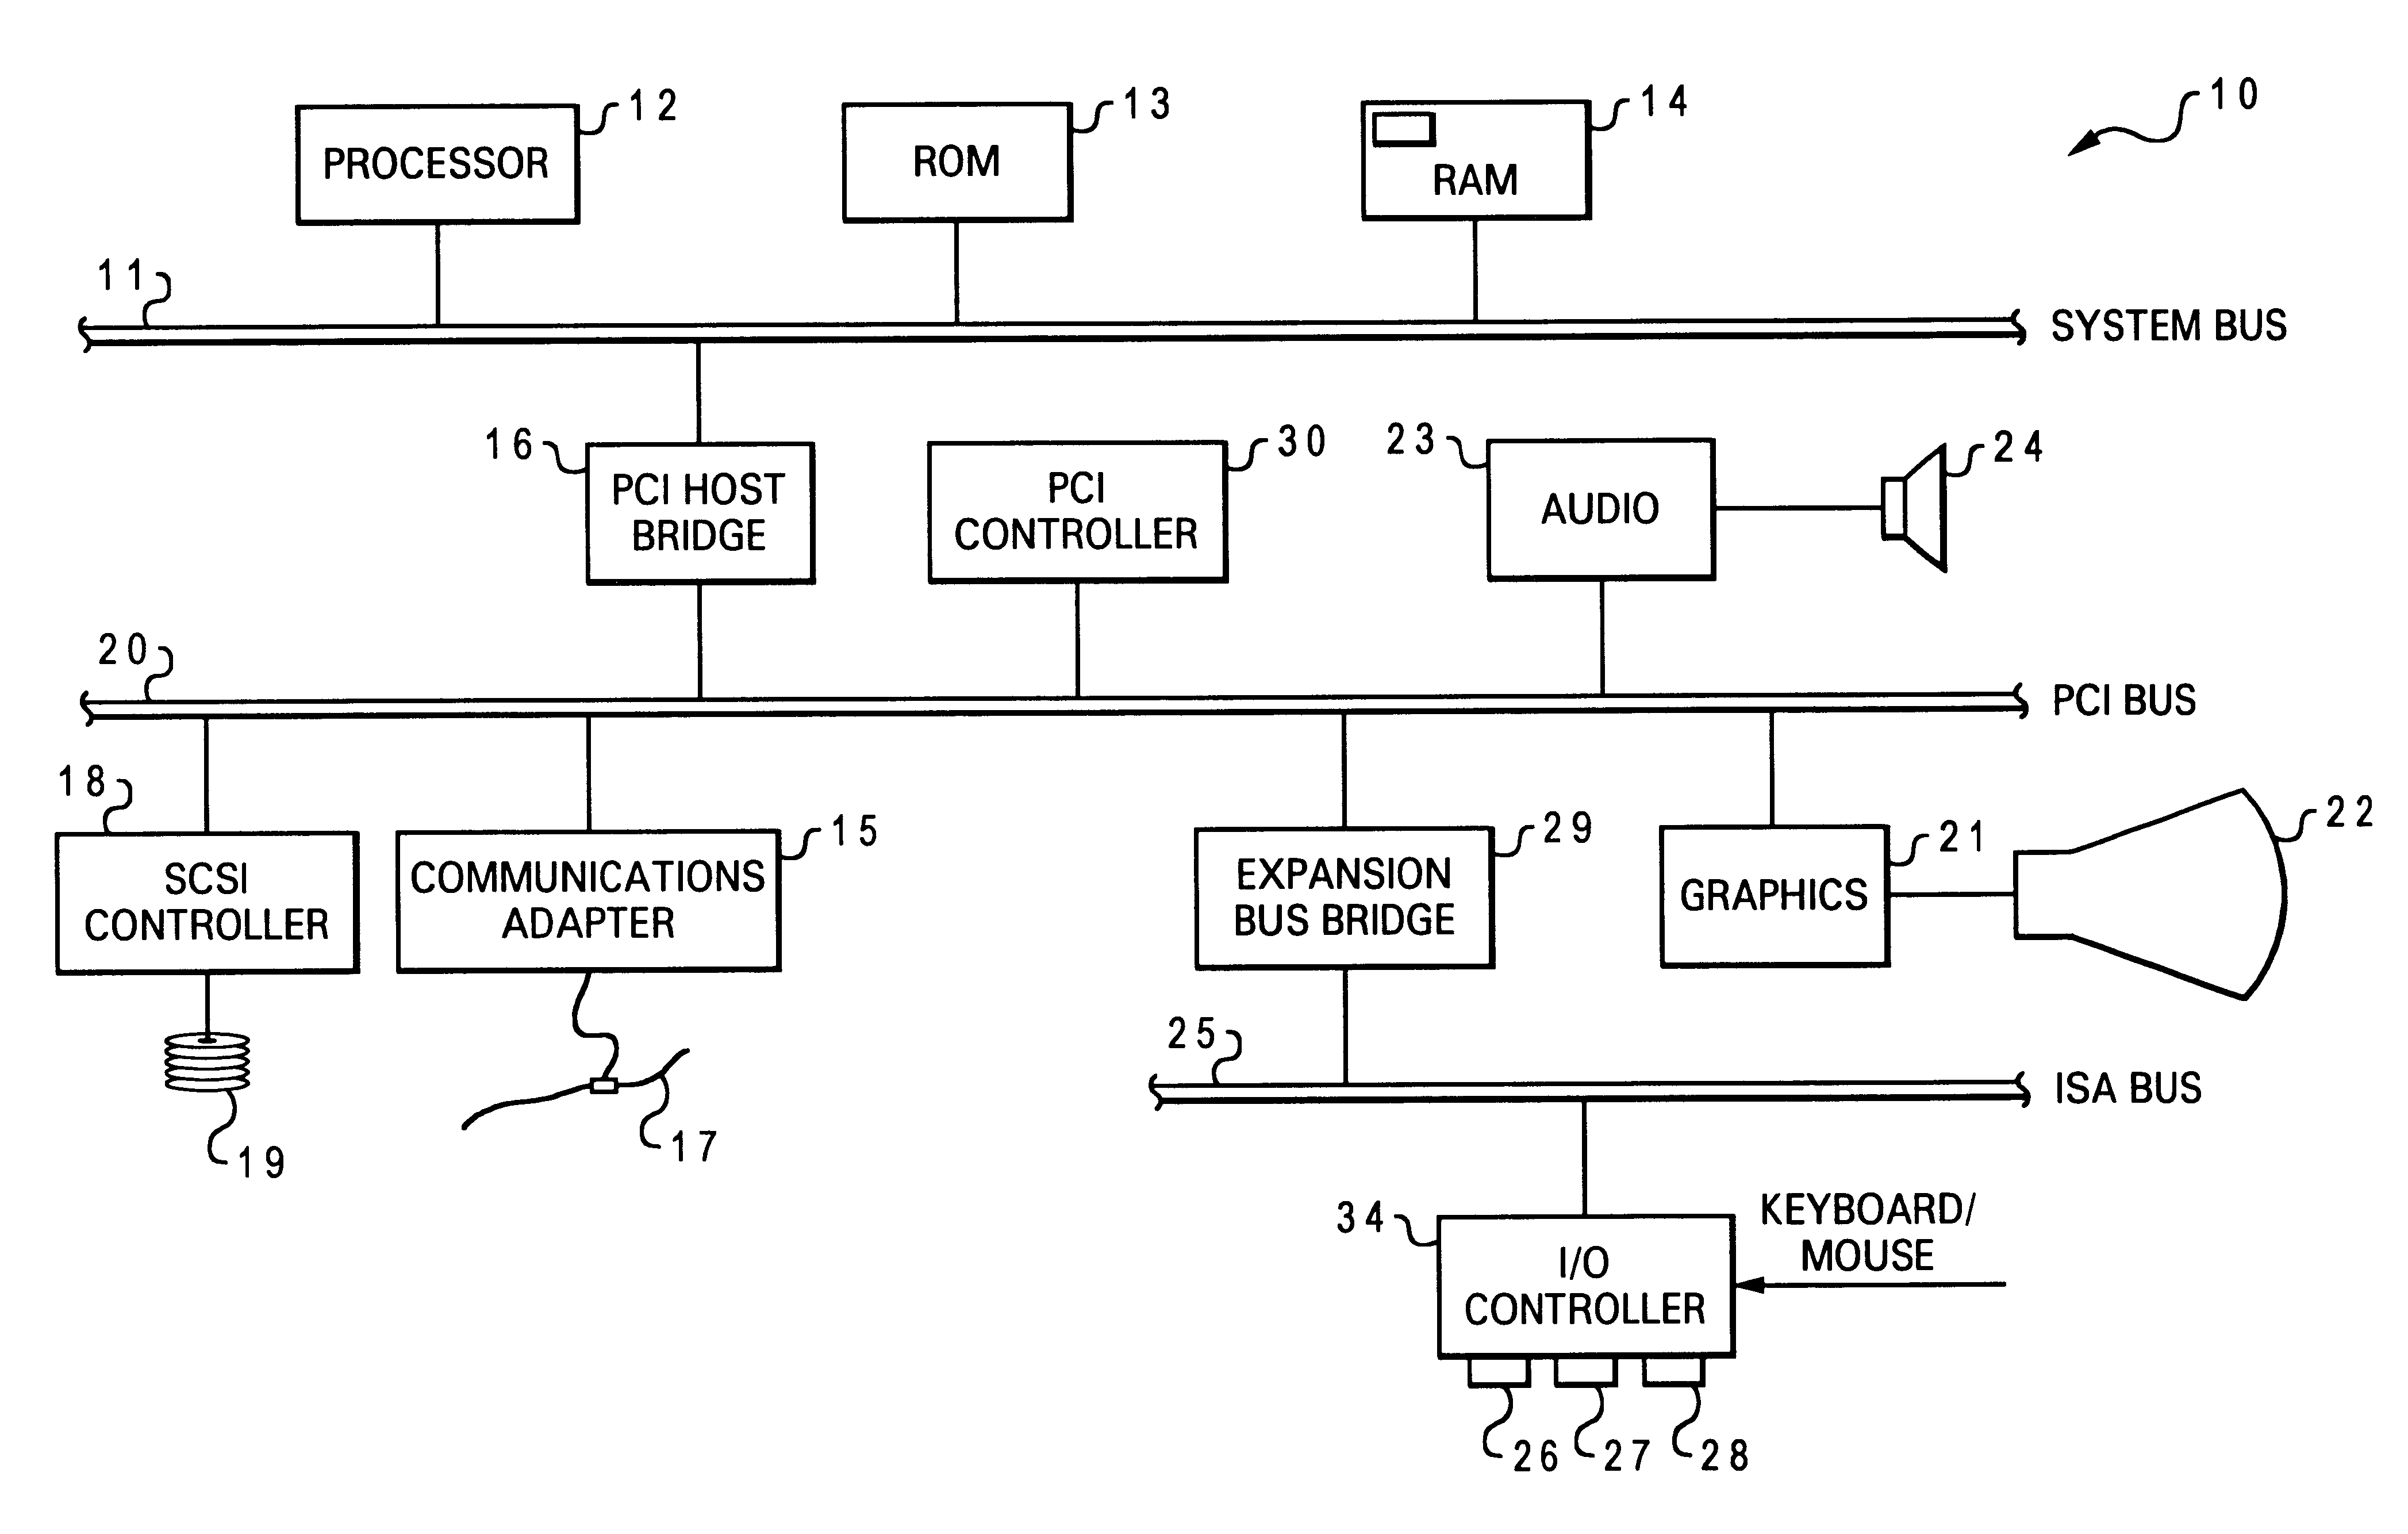 Managing an environment utilizing a portable data processing system